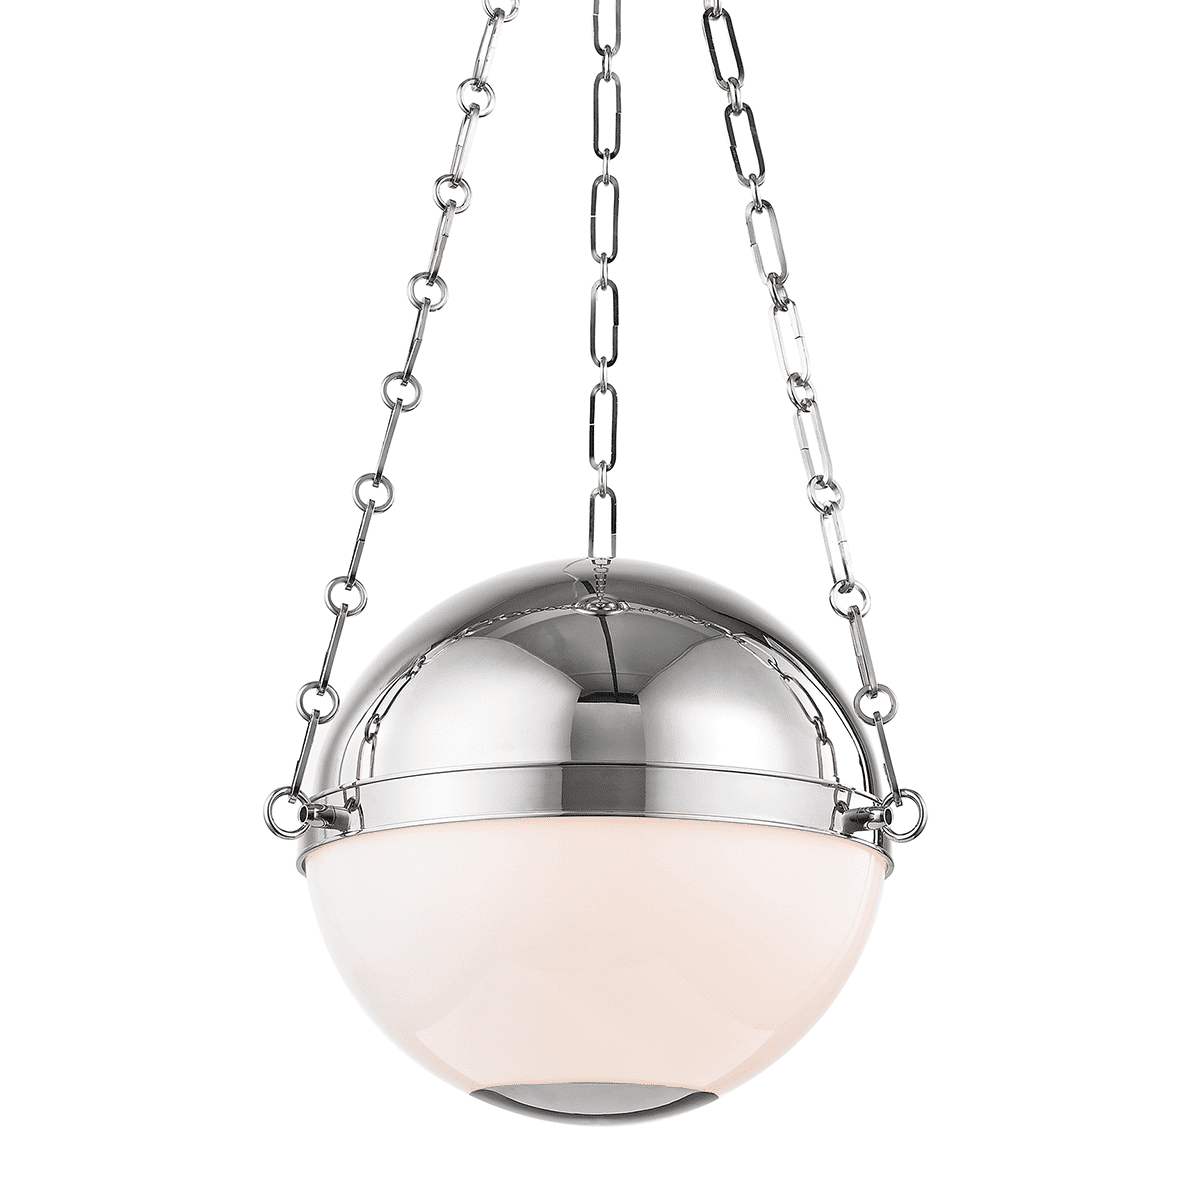 Taklampa Sphere No.2 2 Light Small Taklampa (Polished nickel) (MDS750-PN-CE)